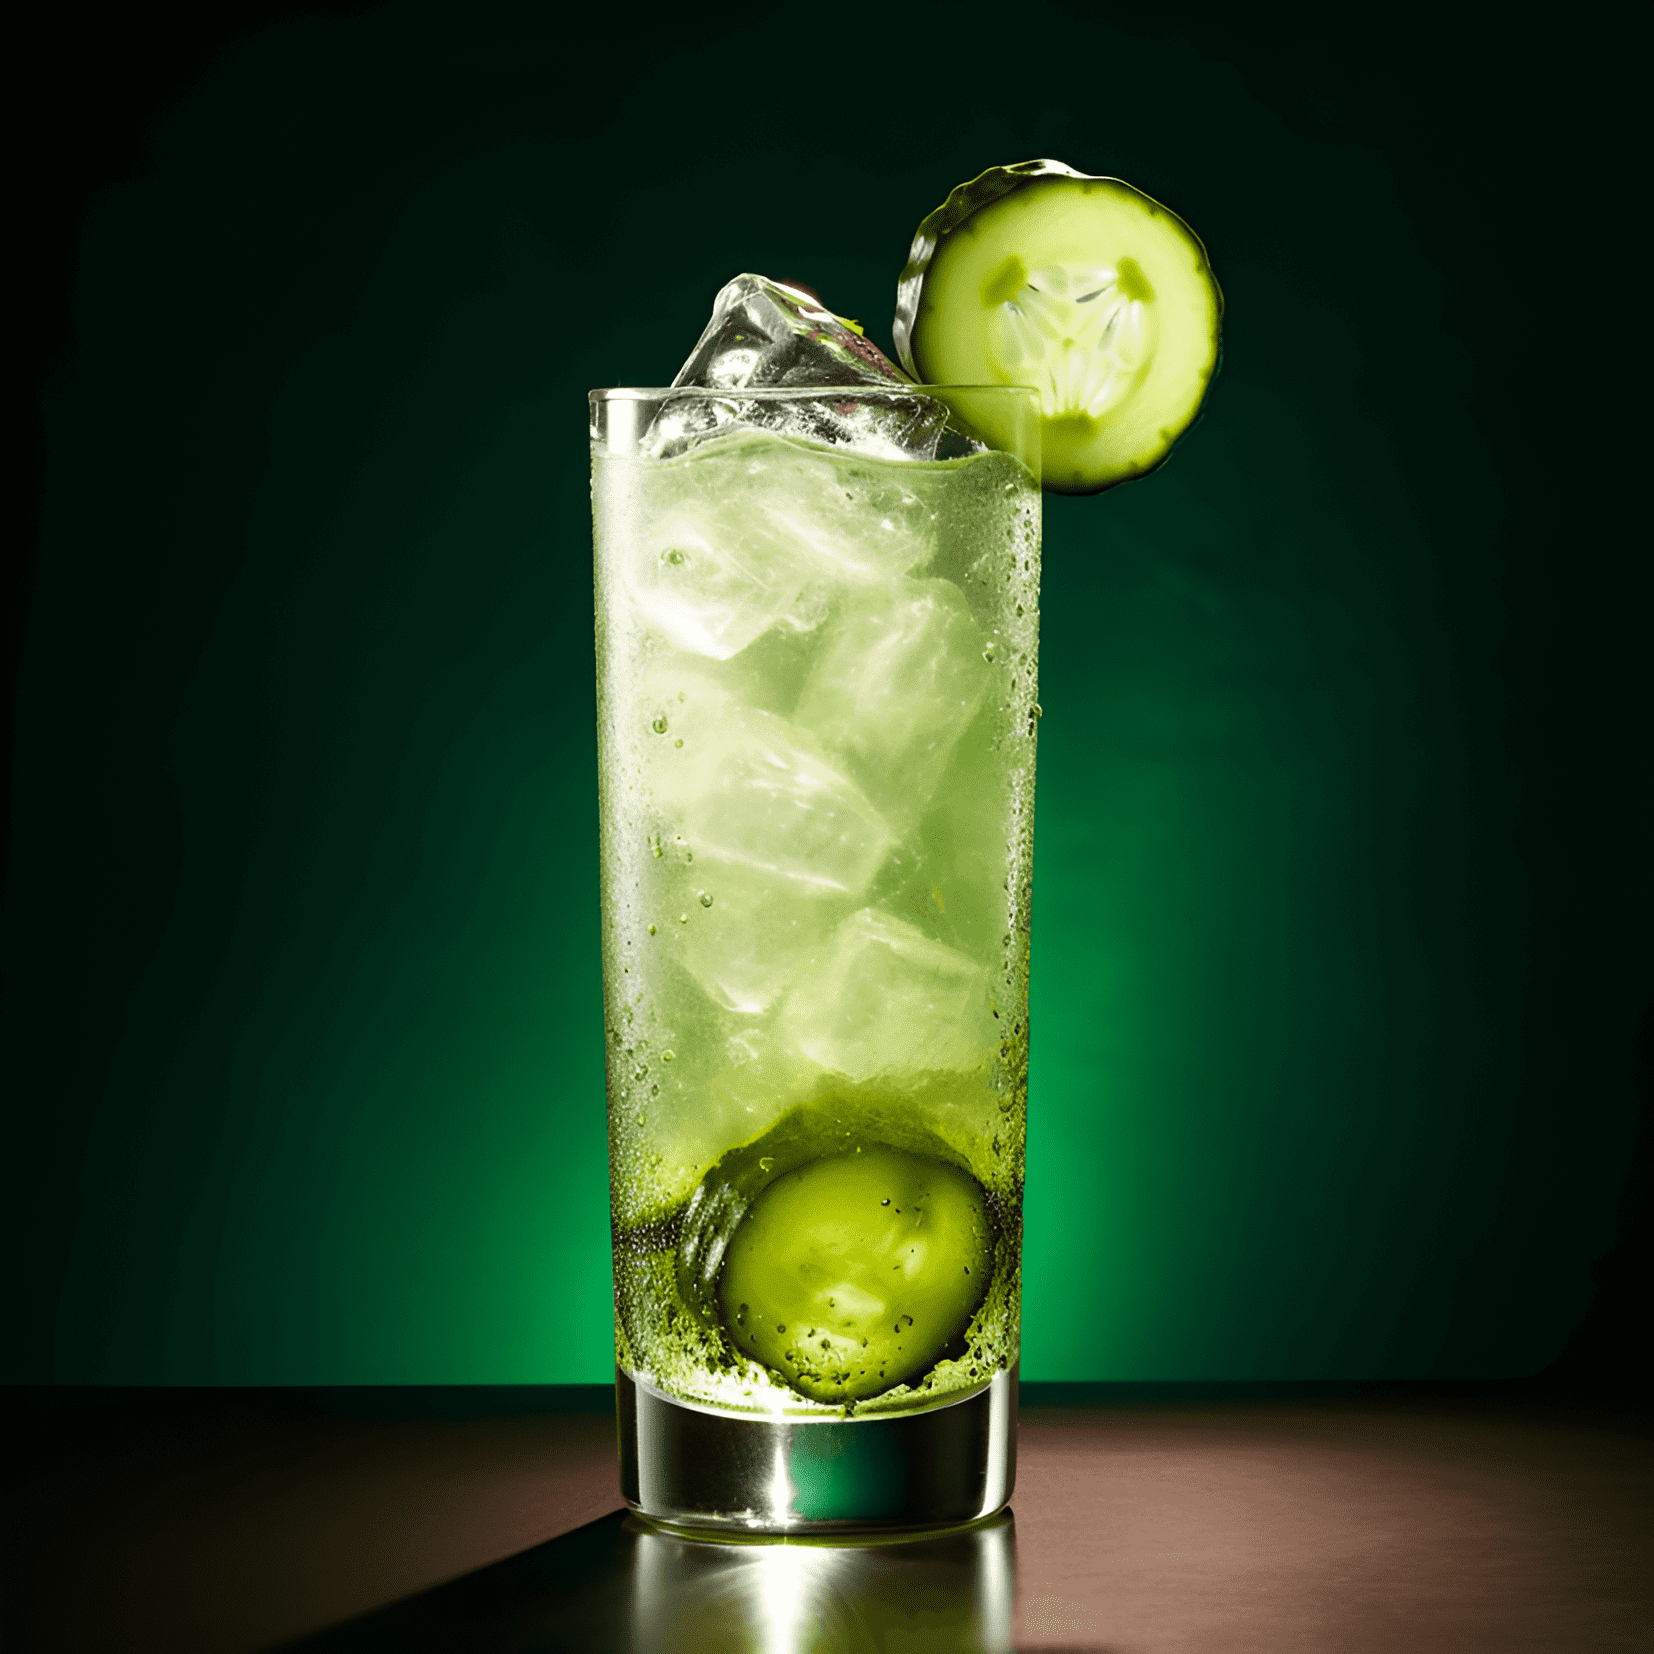 The Southwest cocktail is a complex and flavorful drink, with a spicy kick that lingers on the palate. It is both sweet and sour, with a hint of smokiness from the mezcal. The heat from the jalapeño is balanced by the cooling freshness of the cucumber and lime, making it a refreshing and invigorating drink.